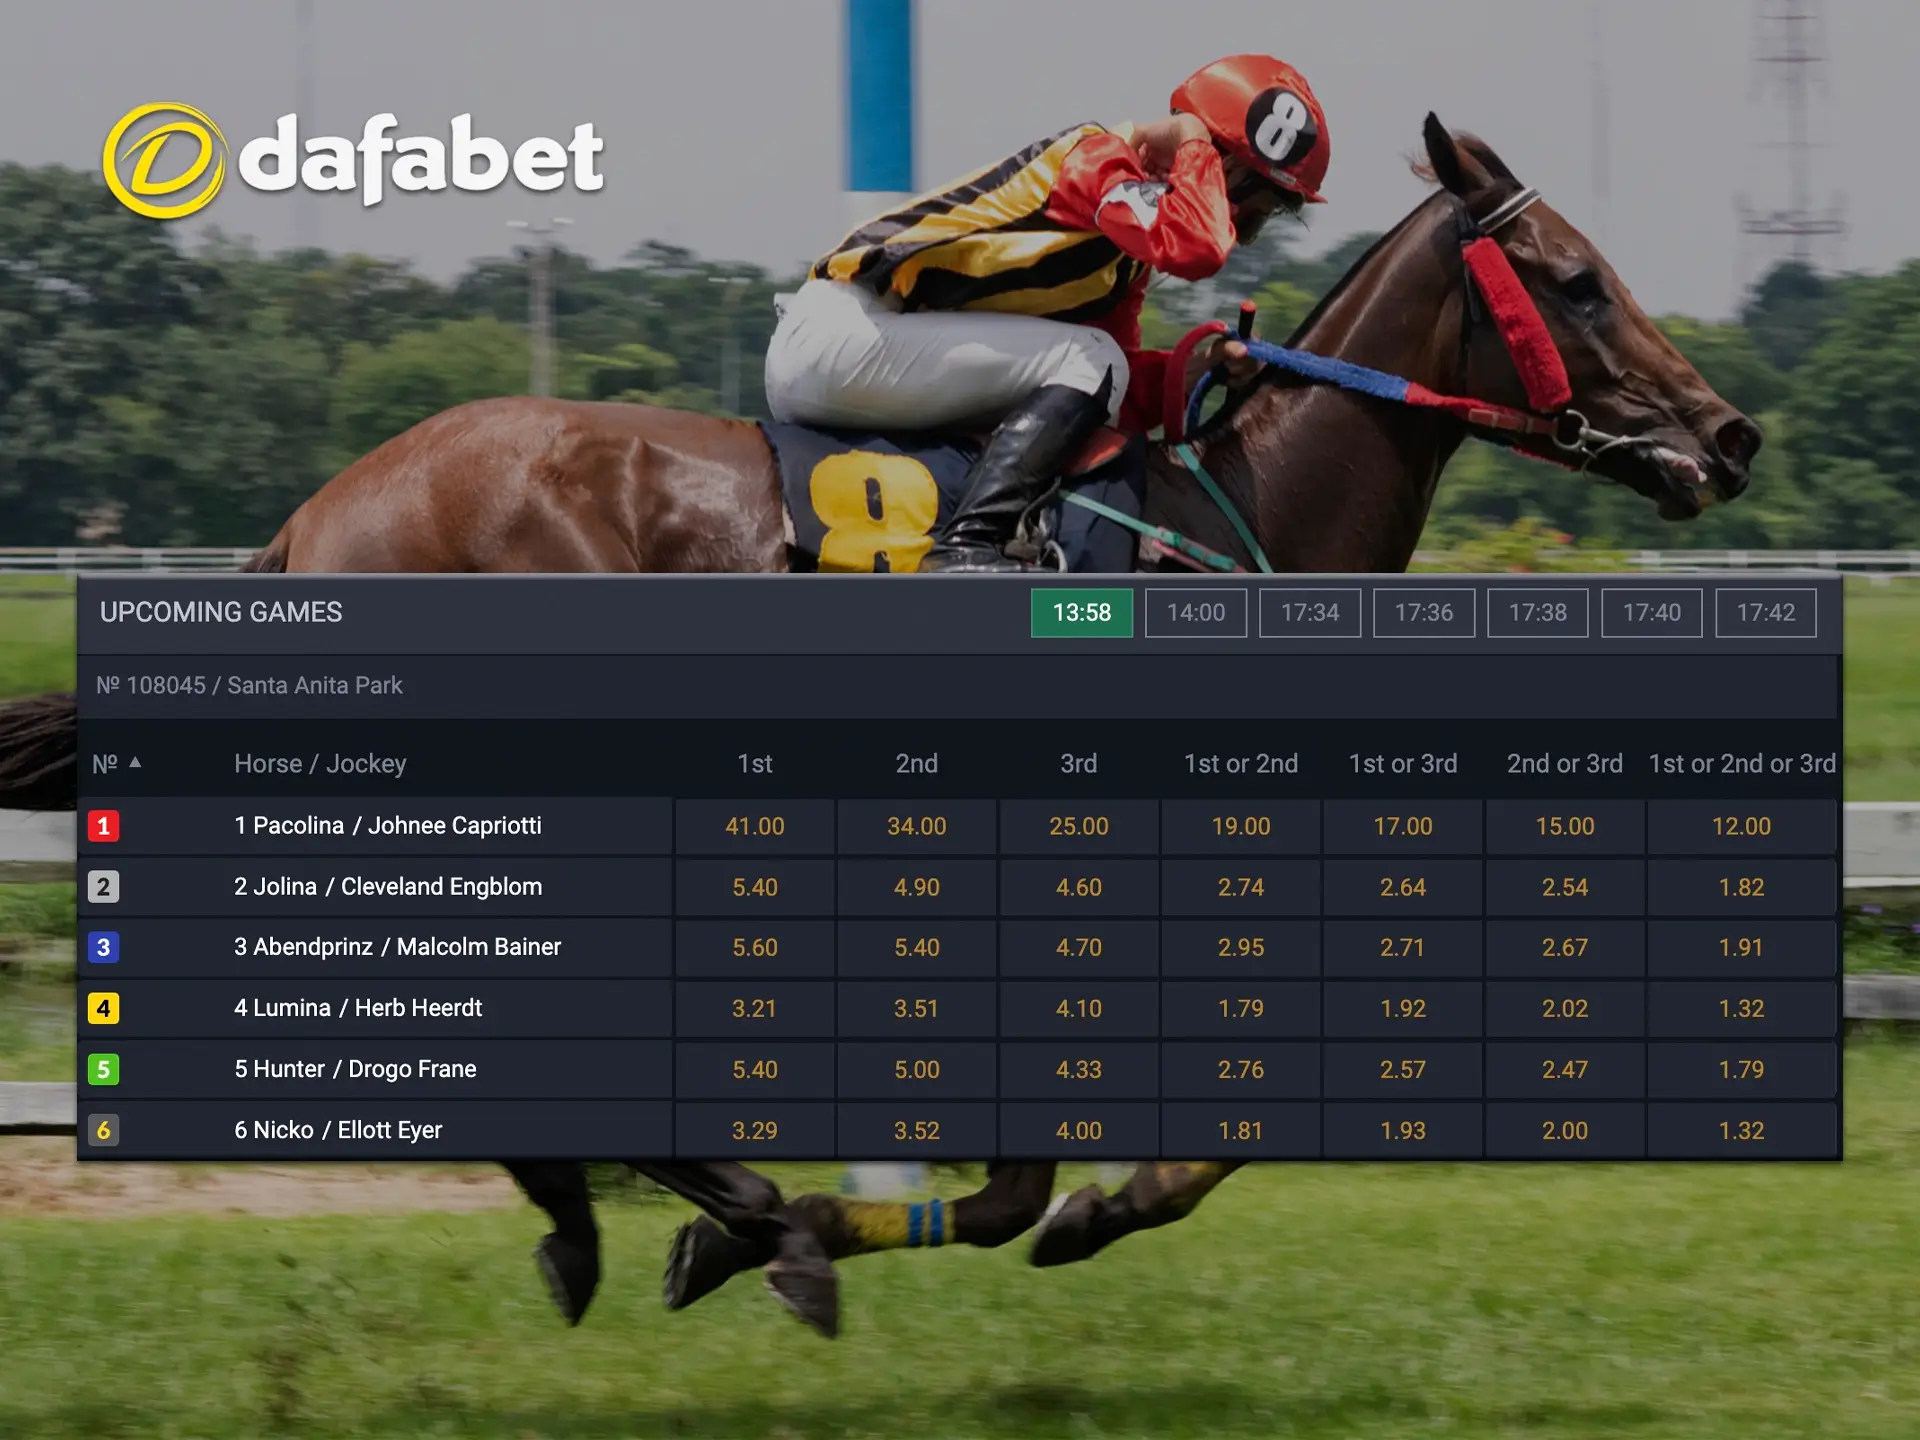 Dafabet has the best offers in the horse racing betting market.